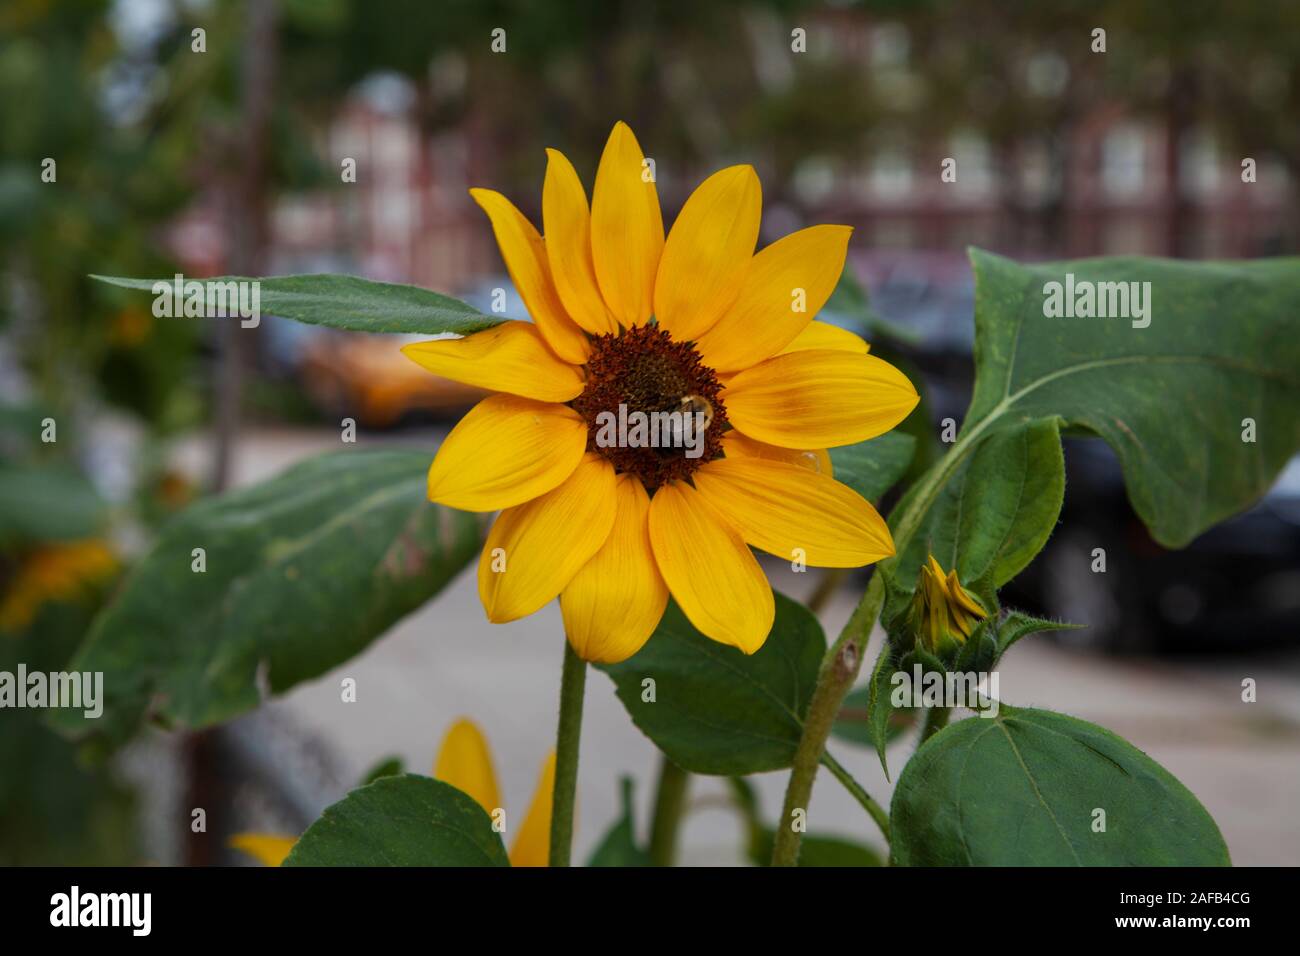 A bee on a sunflower on a city street in Astoria, Queens. Stock Photo